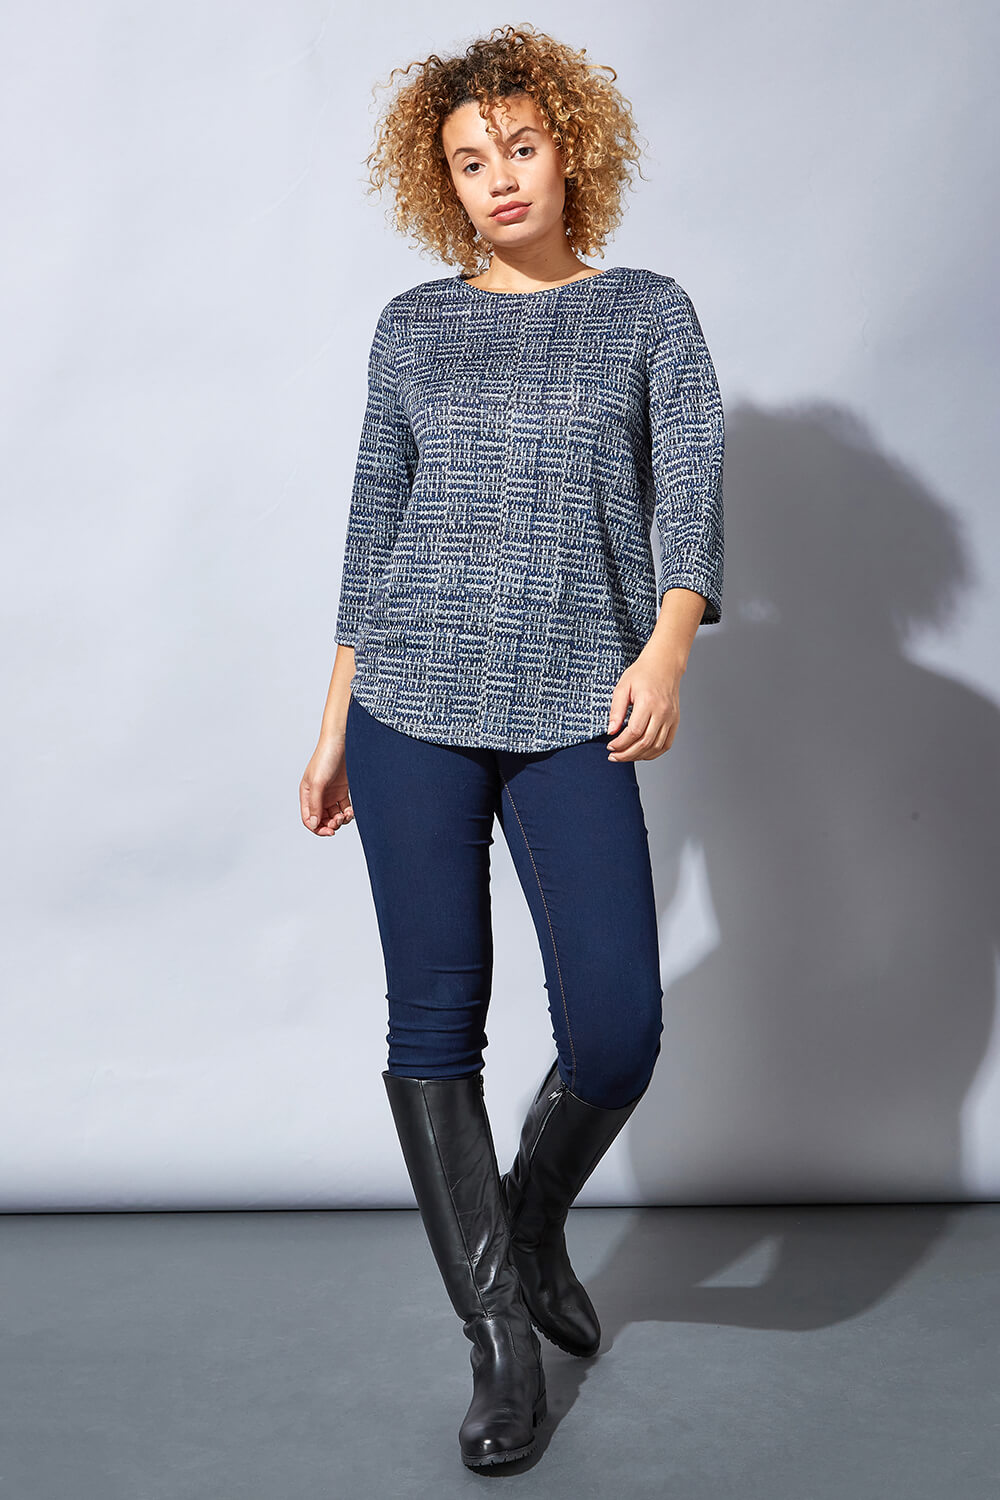 Blue Contrast Check Print Jersey Knit Top, Image 5 of 5